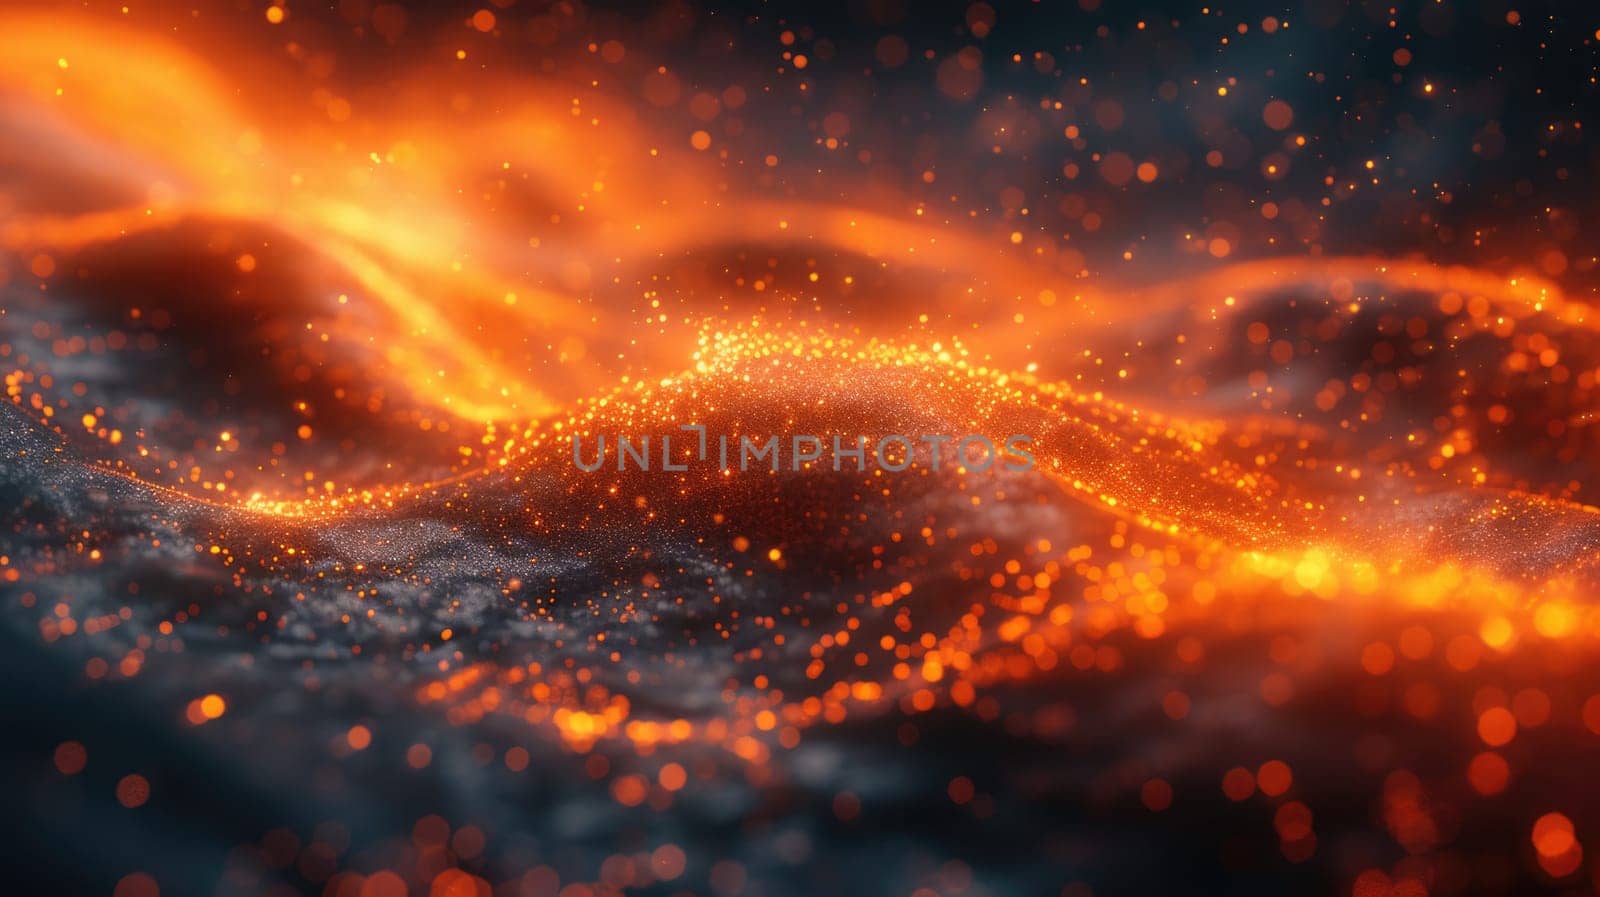 An abstract image featuring a vibrant orange and black background with out-of-focus lights creating a blurred effect.